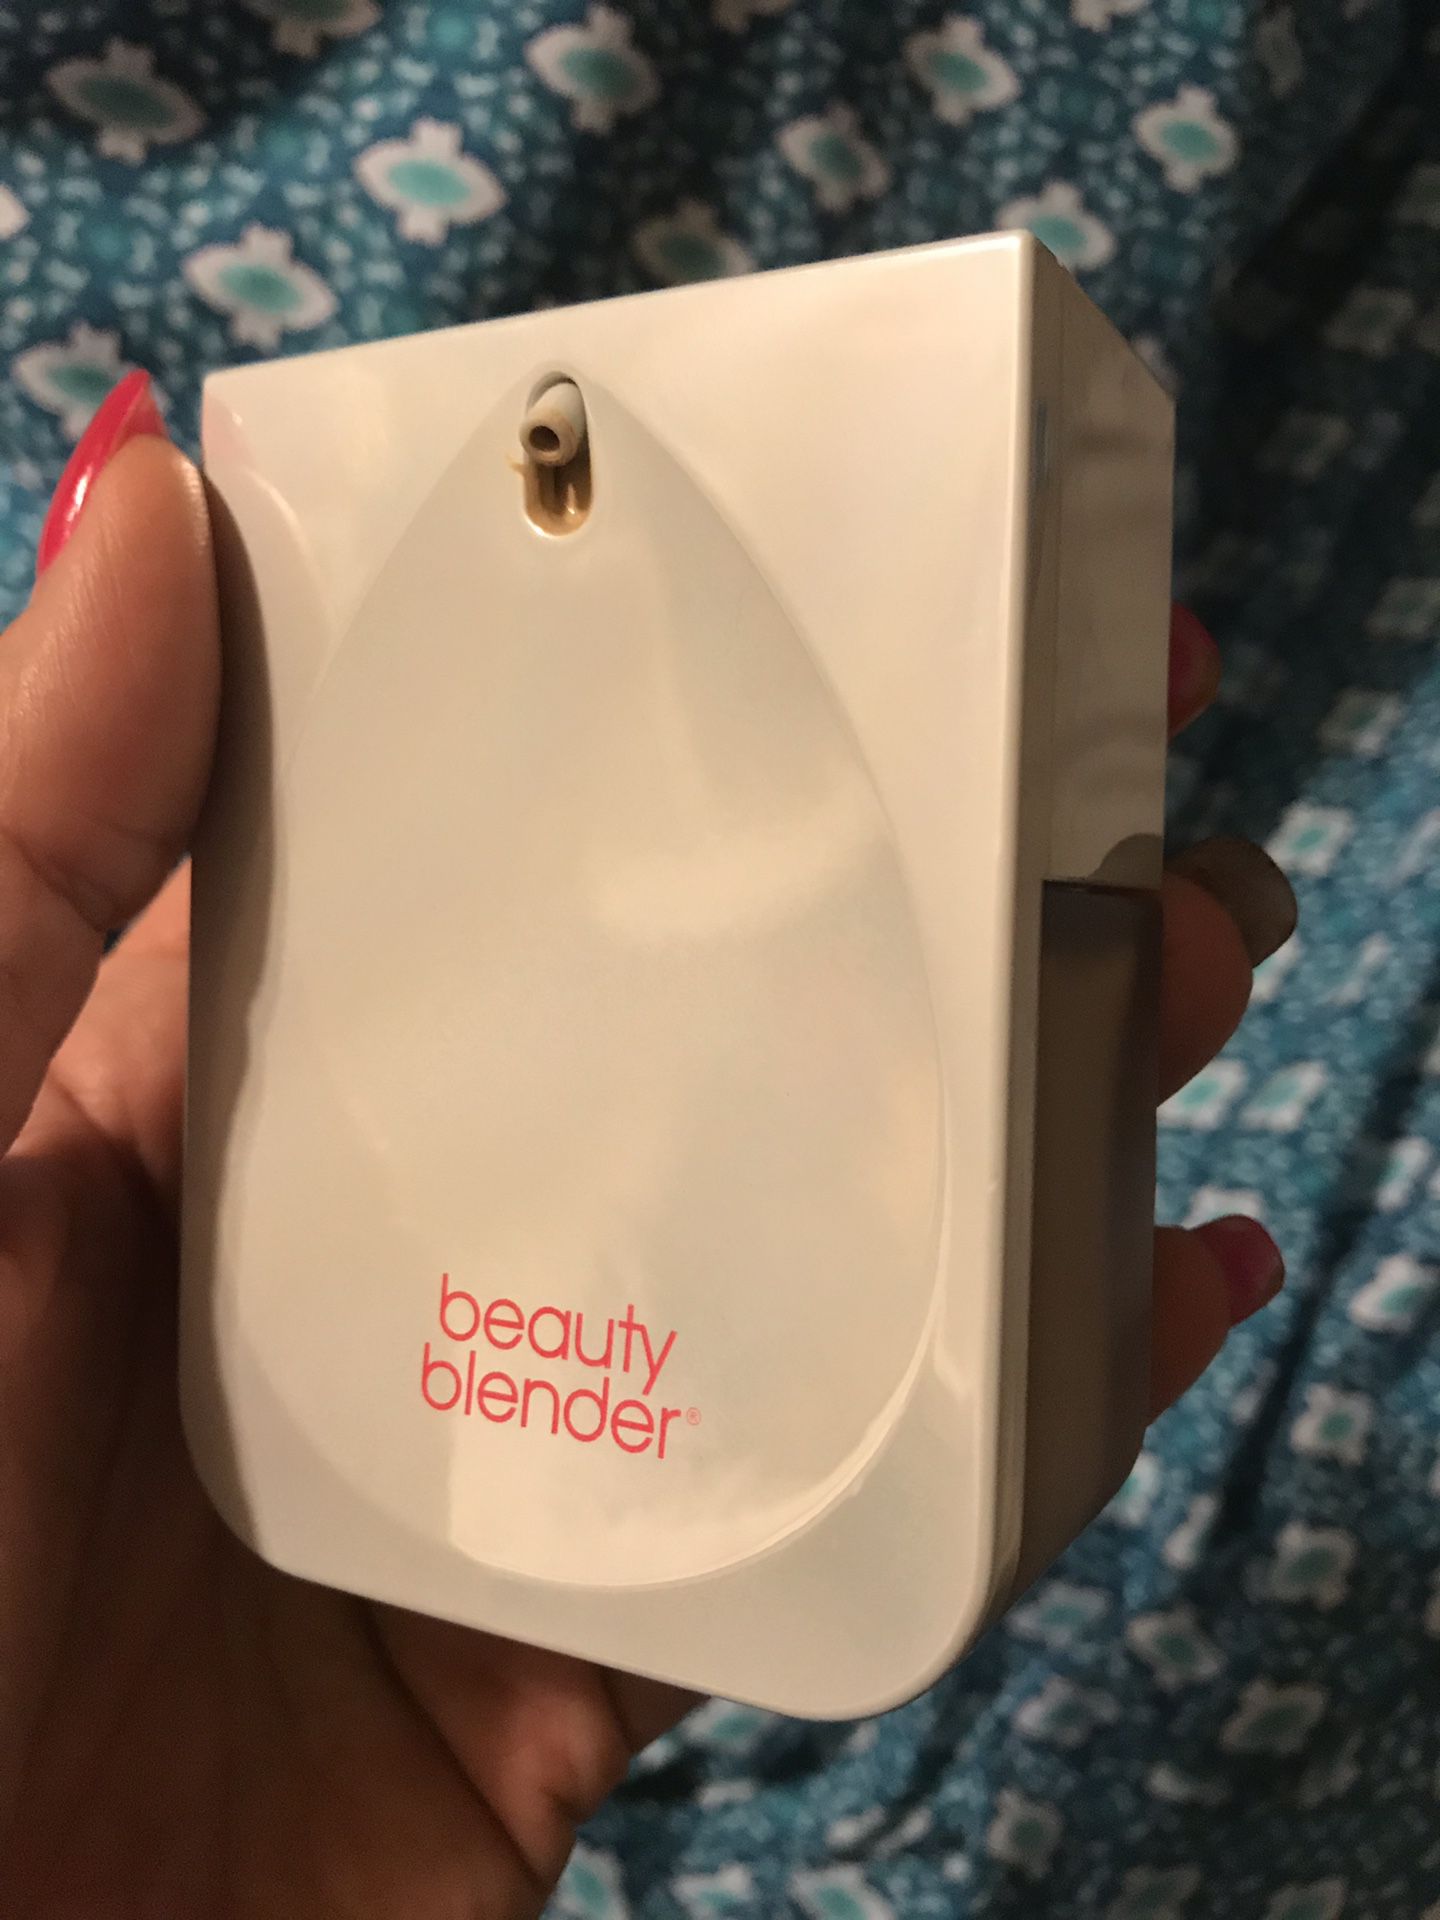 Almost new beauty blender make up foundation paid over $48